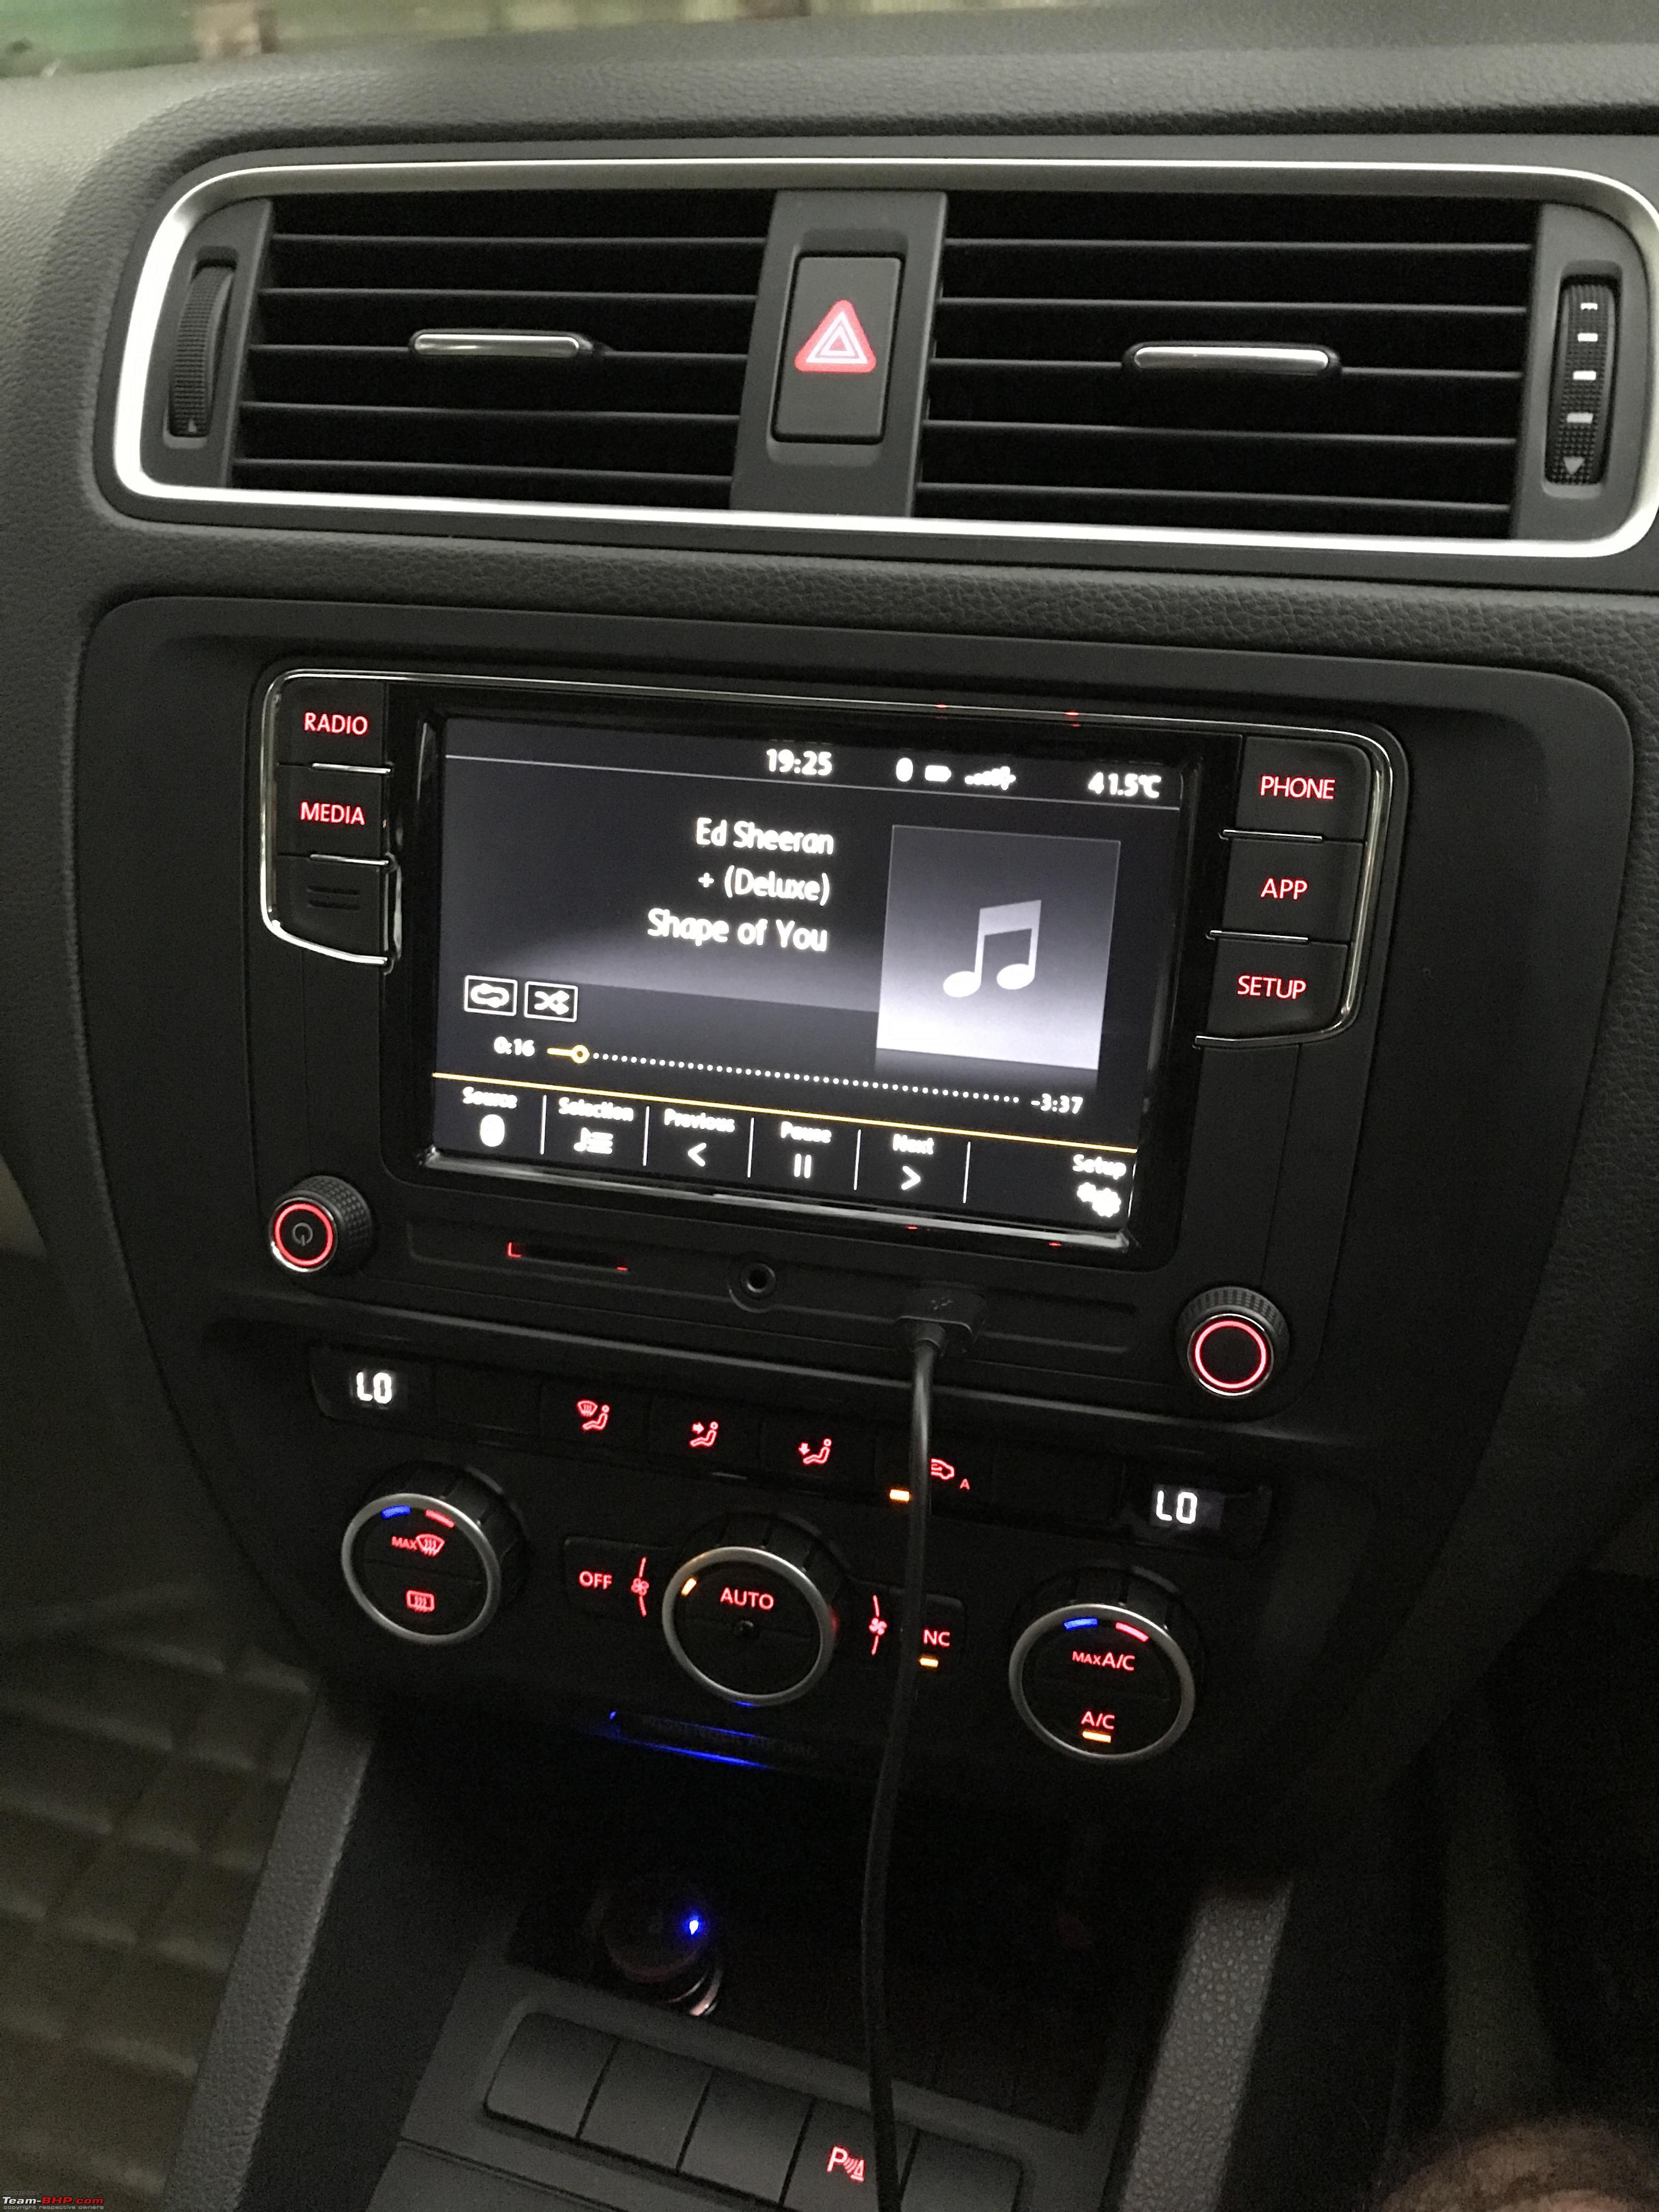 VW Polo/Vento : Replaced stock RCD320 with RCD330 Plus + rear view camera  installation guide - Page 12 - Team-BHP